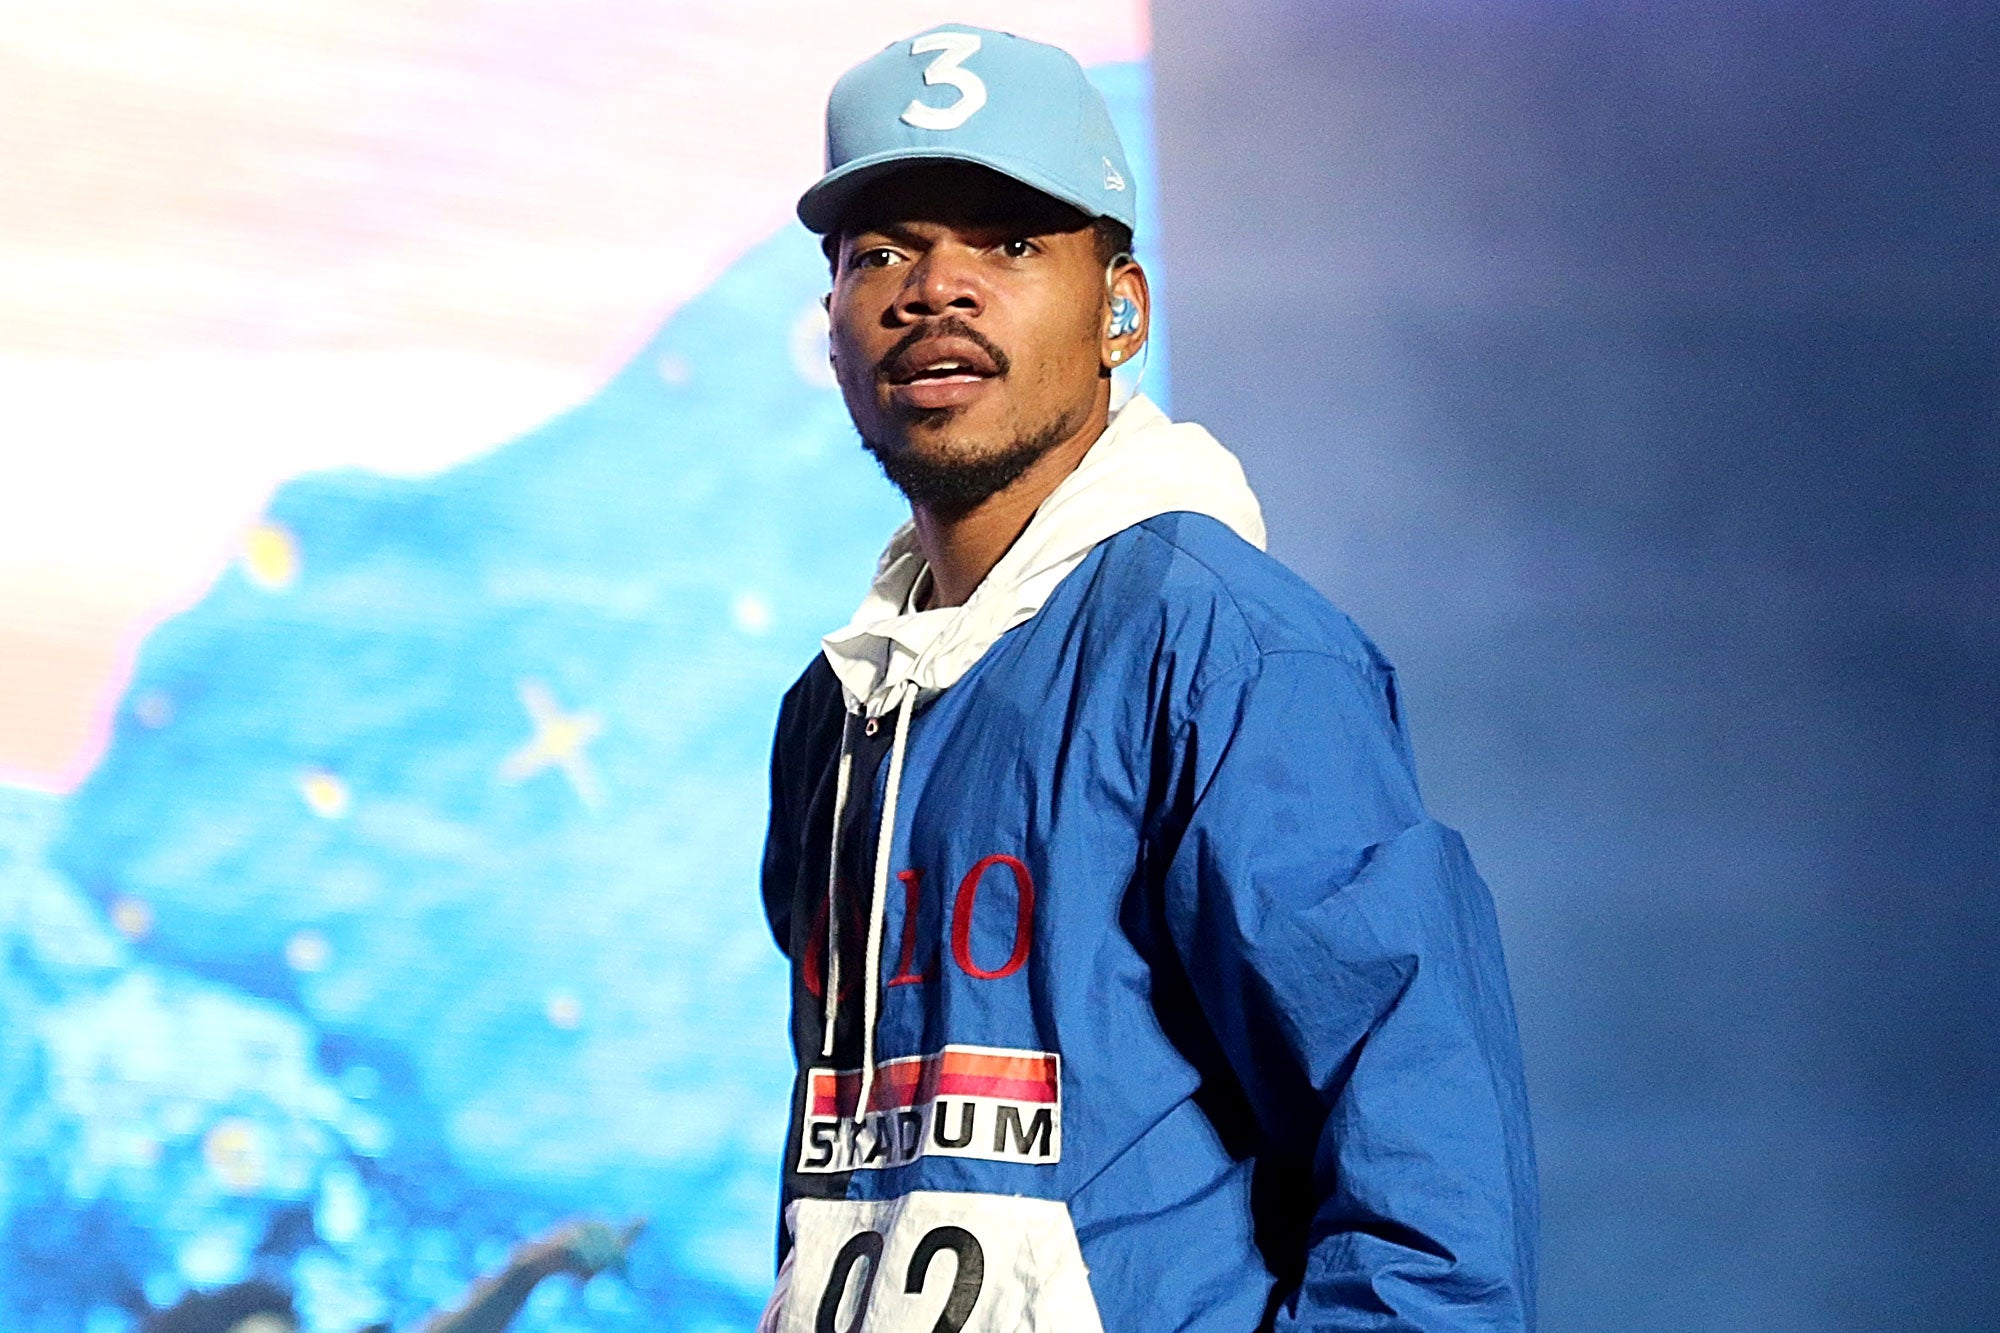 Chance The Rapper Live Streams His Police Stop: 'Can't Be Too Careful'
